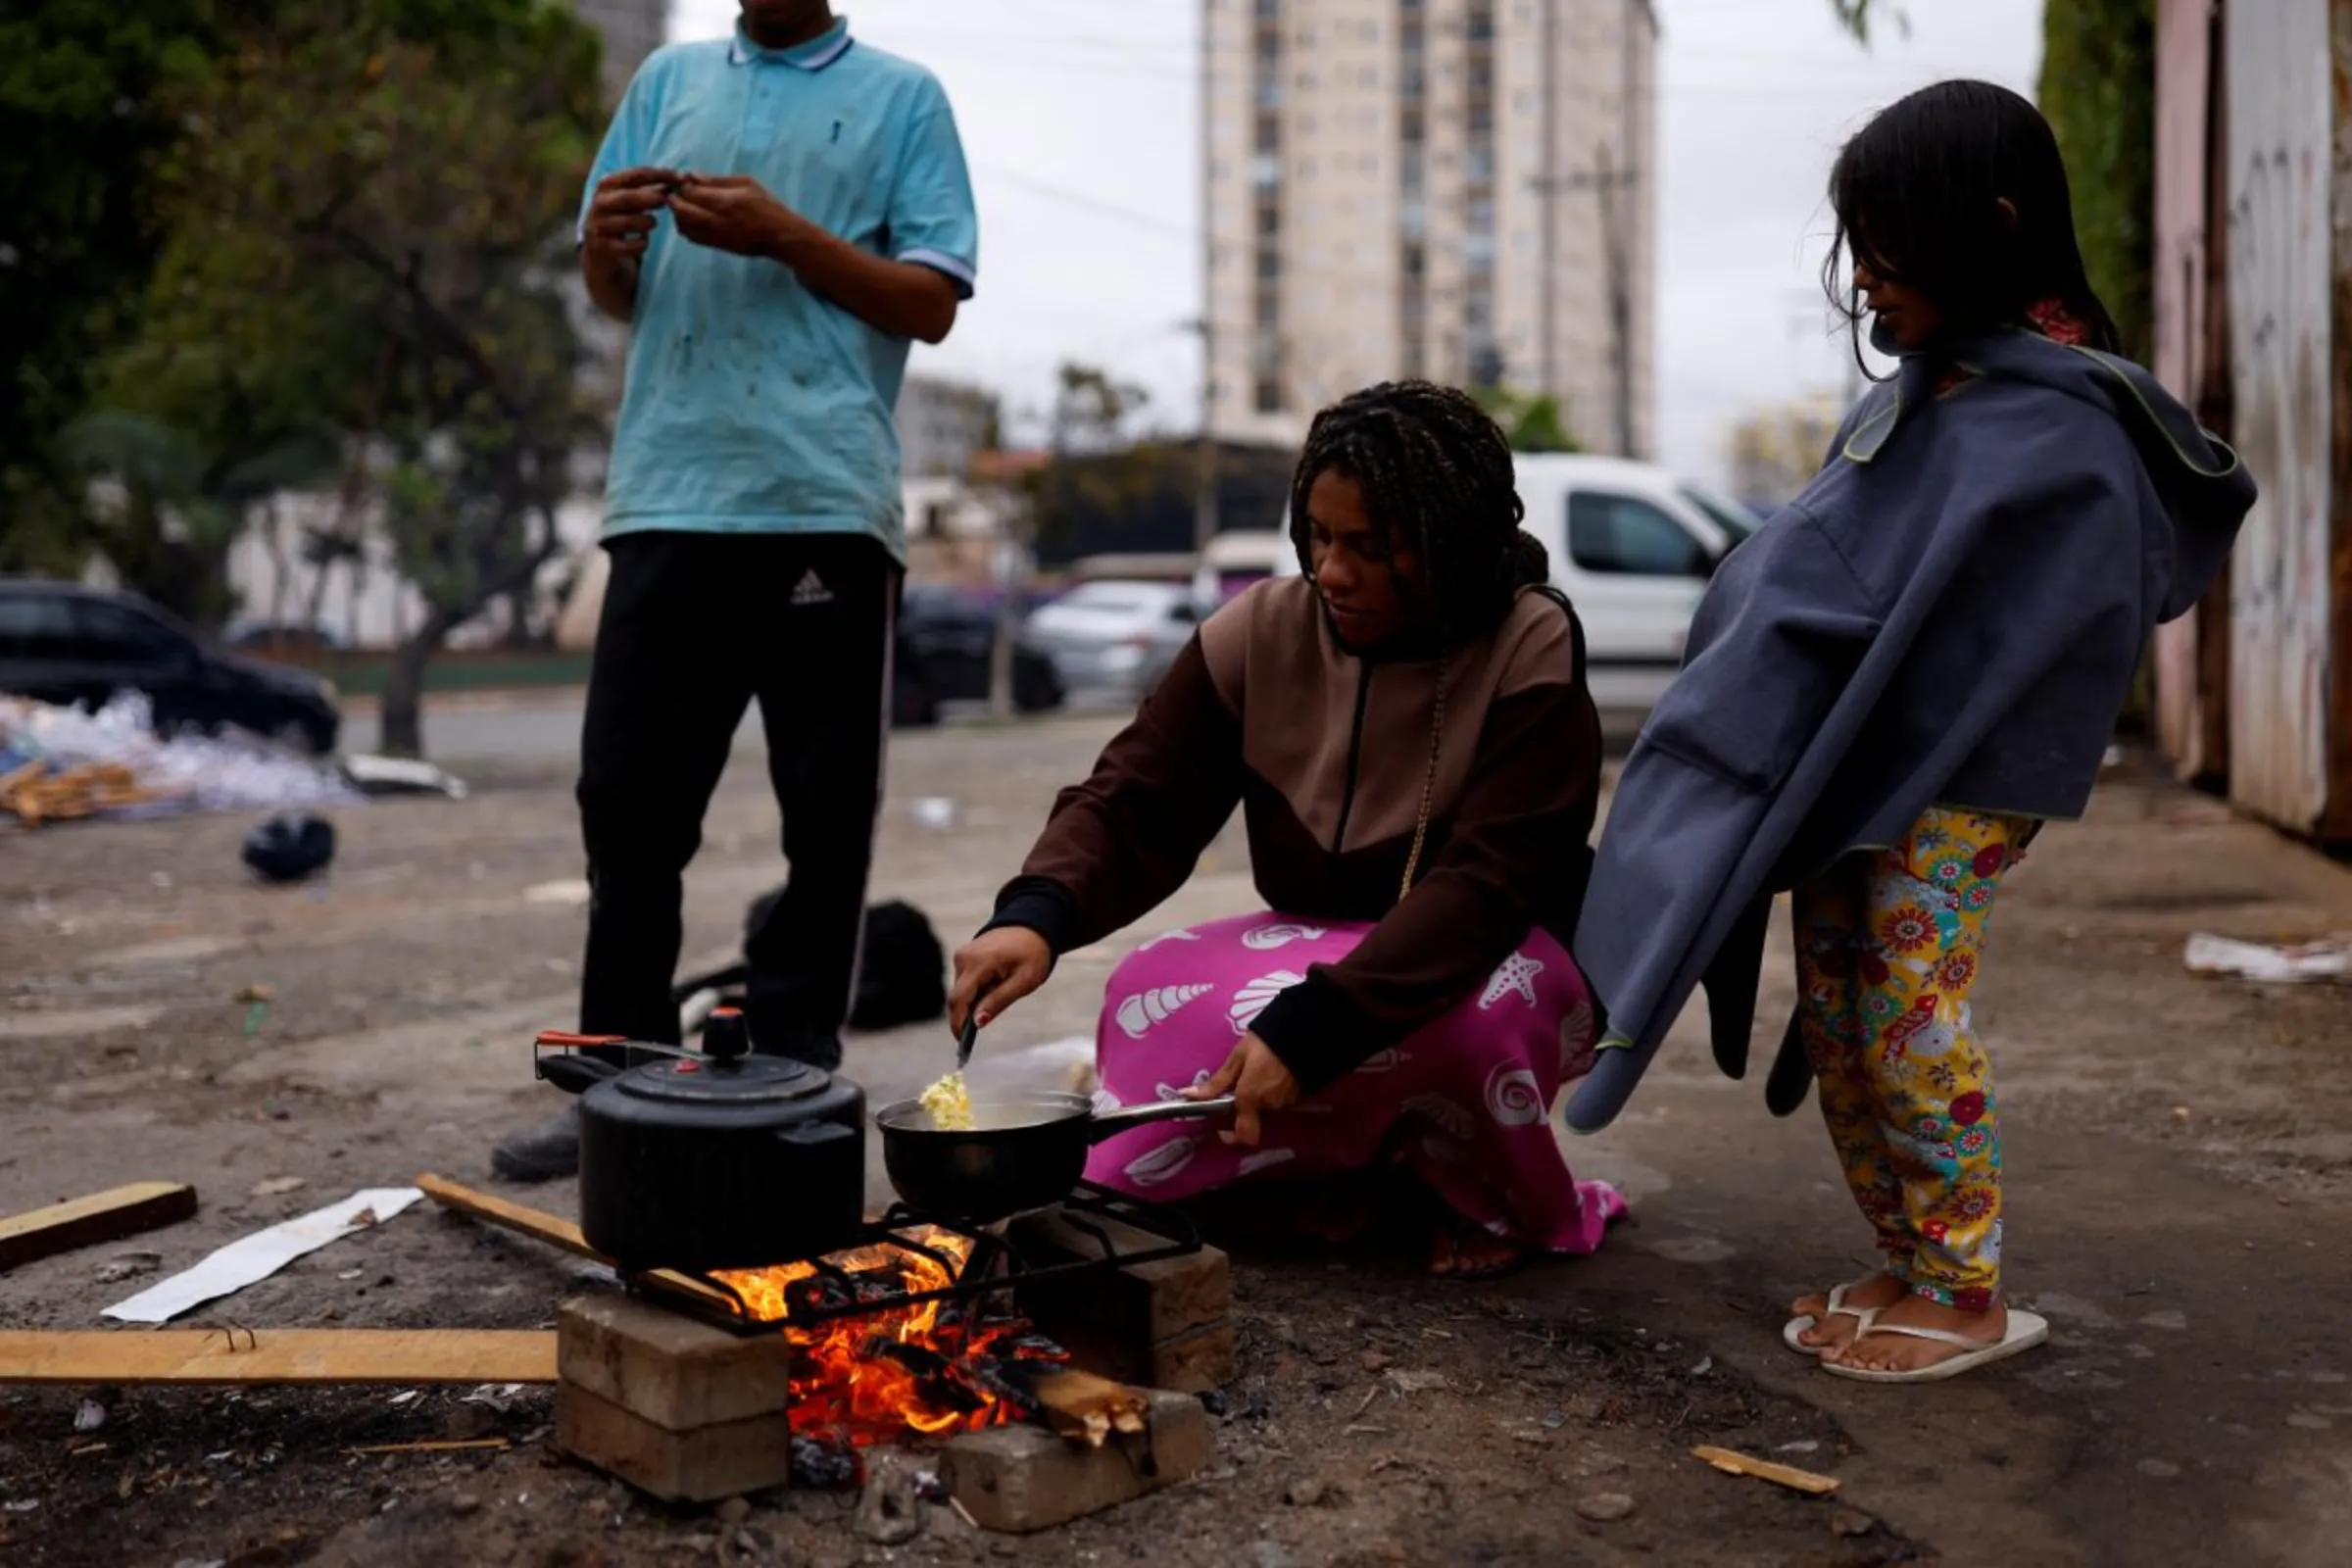 A pregnant woman burns wood on the street to cook a meal for her husband and their daughter outside their home in Sao Paulo, Brazil, September 16, 2022